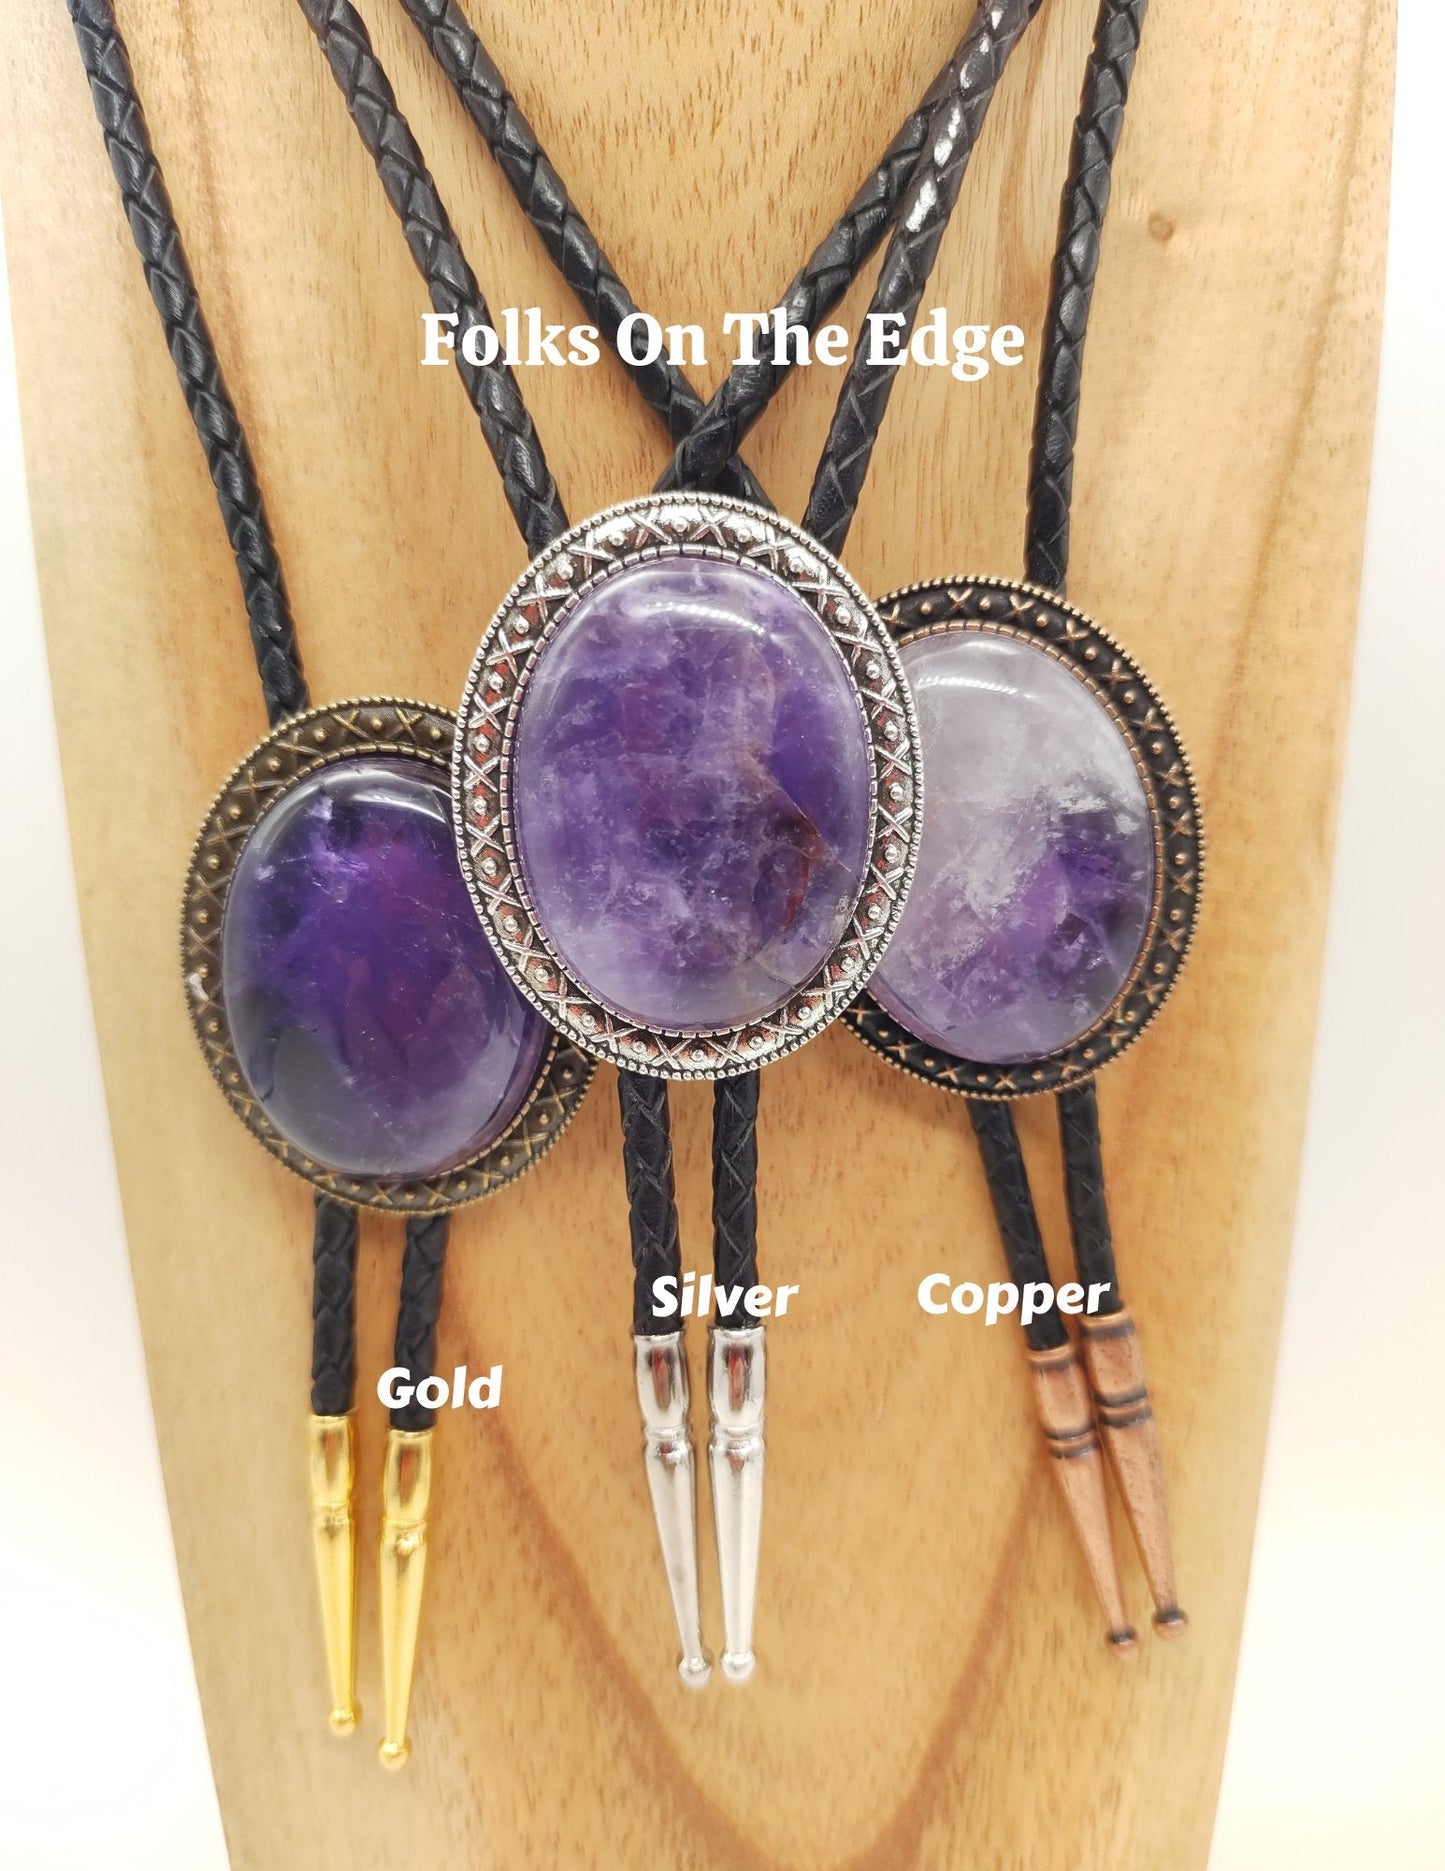 Yellowstone Bolo Tie with Purple Amethyst in Gold, Silver or Copper colors - Folks On The Edge